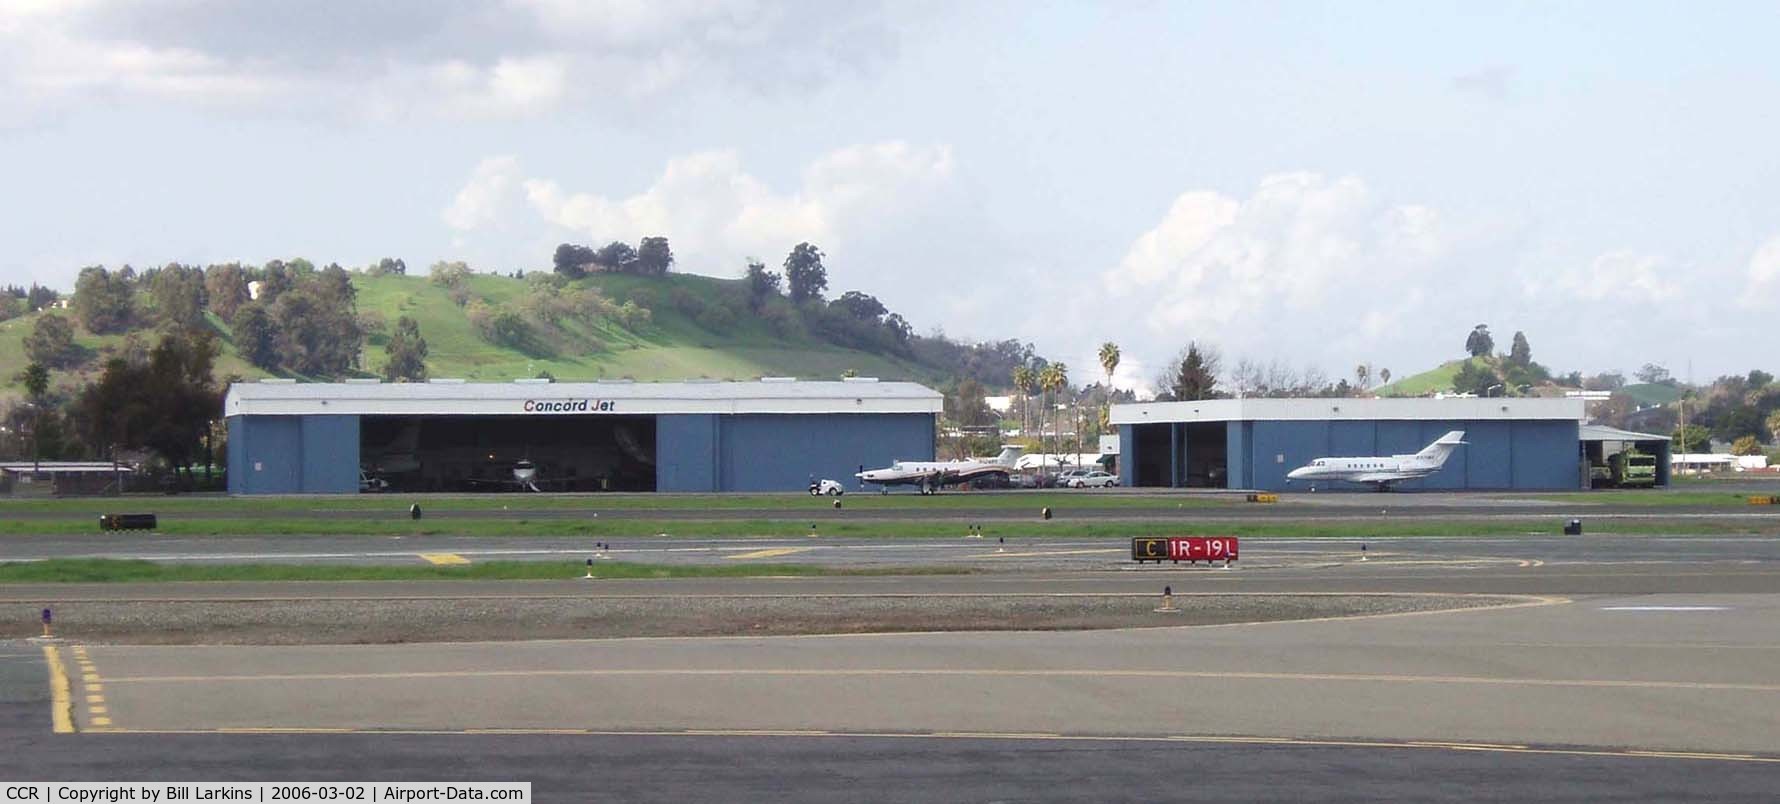 Buchanan Field Airport (CCR) - Concord Jet facility on the West side of the field.